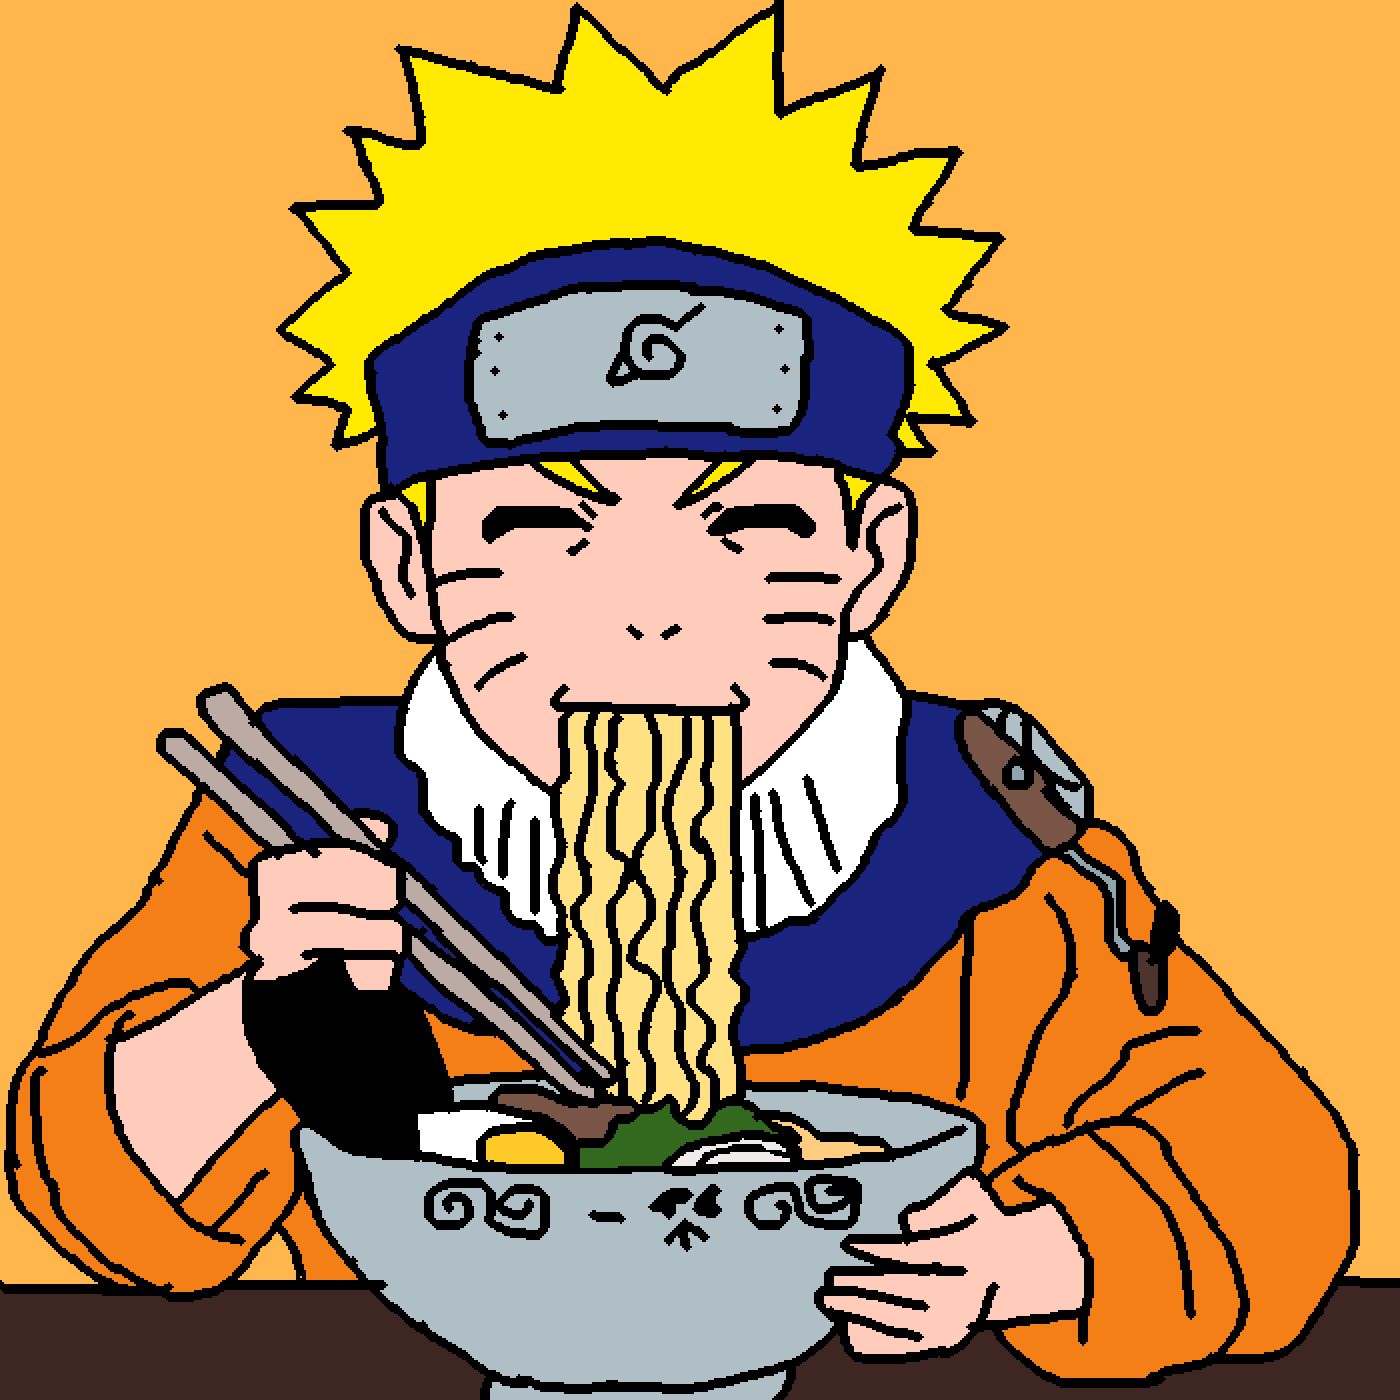 Naruto's Favorite Ramen Revealed! You Won't Believe His Top Pick!